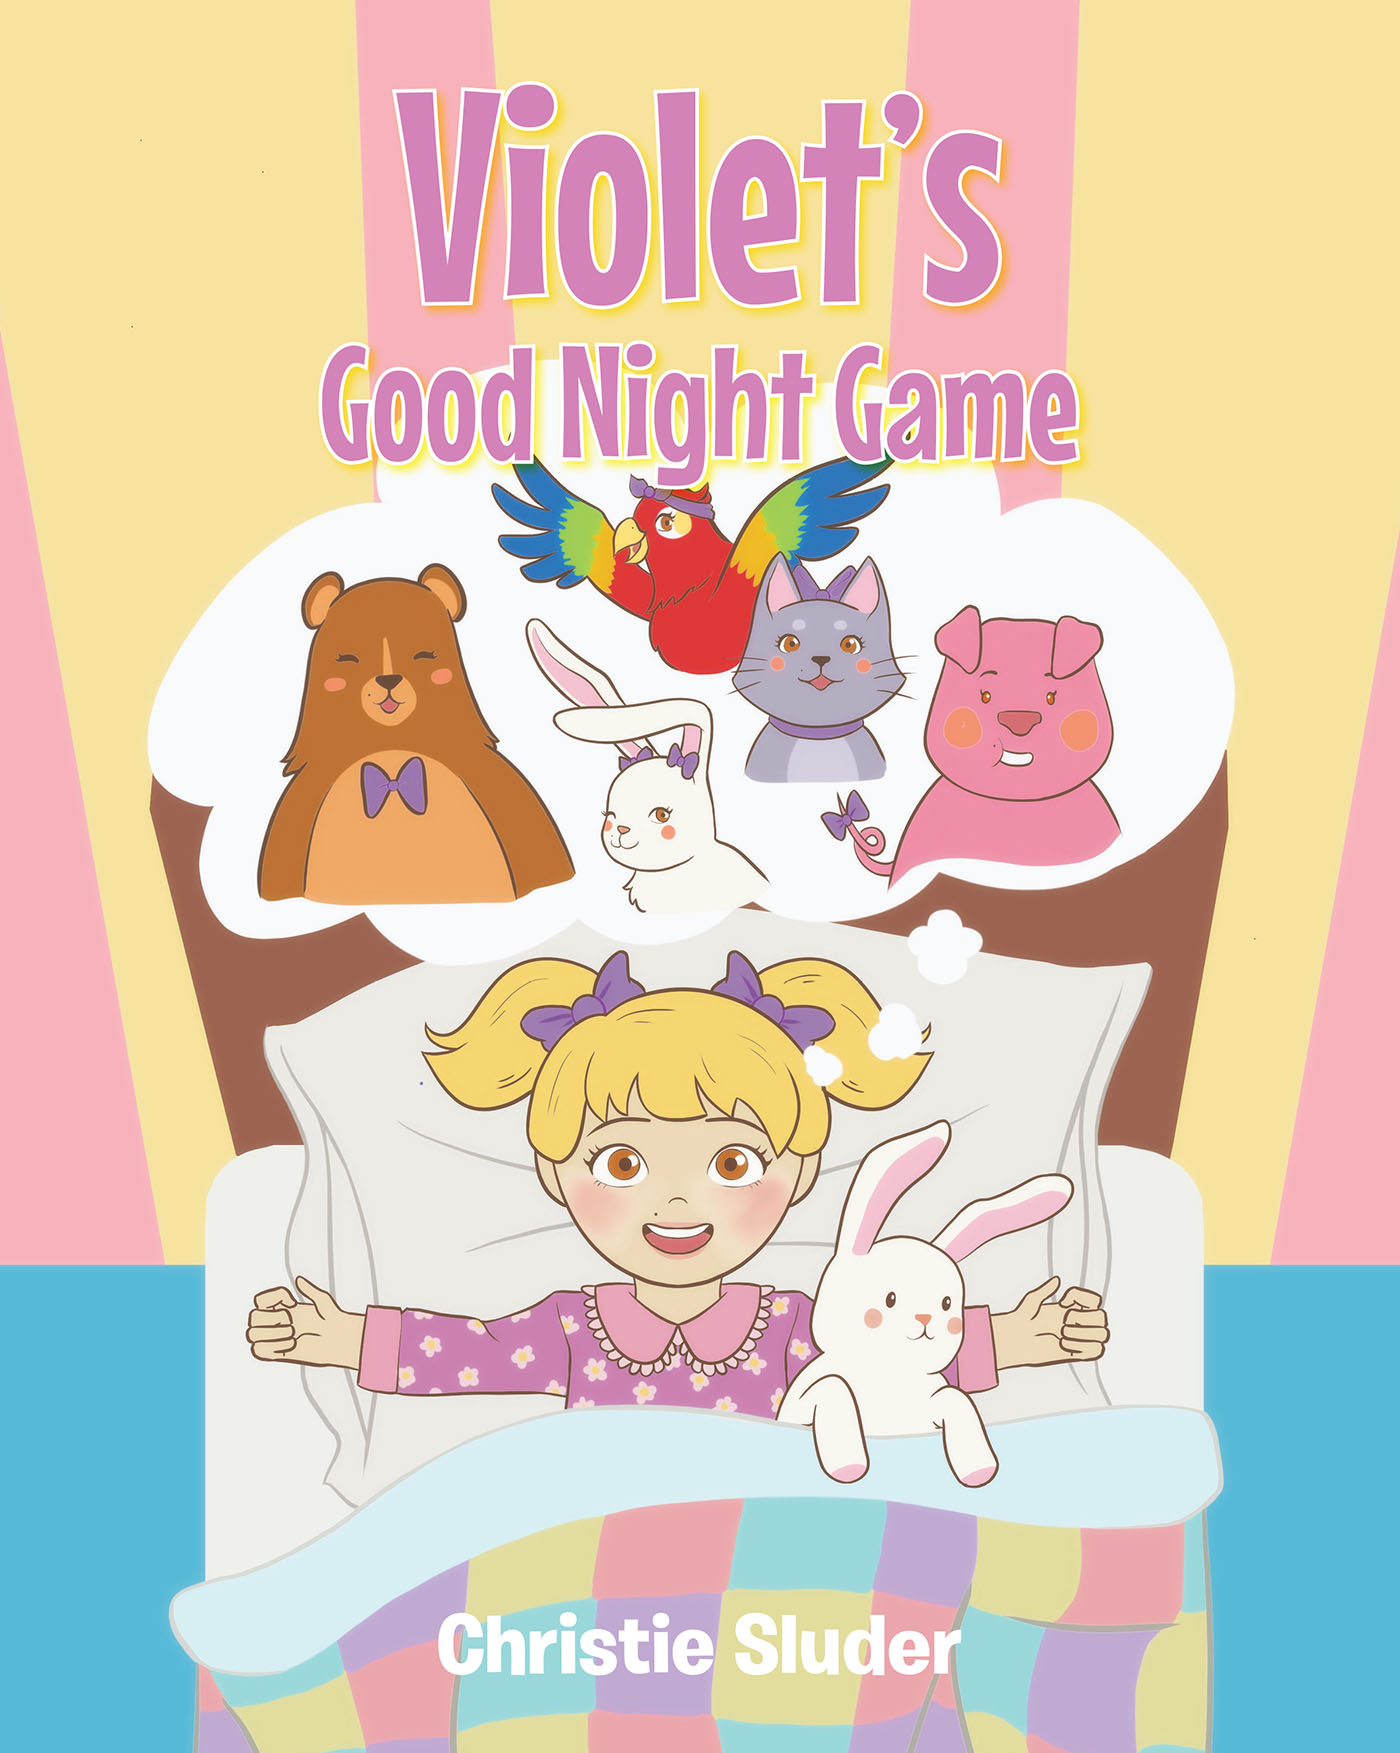 Author Christie Sluder’s New Book, "Violet’s Good Night Game," is a Story of a Little Girl Who, After Being Tucked Into Bed by Her Mommy, Can’t Sleep